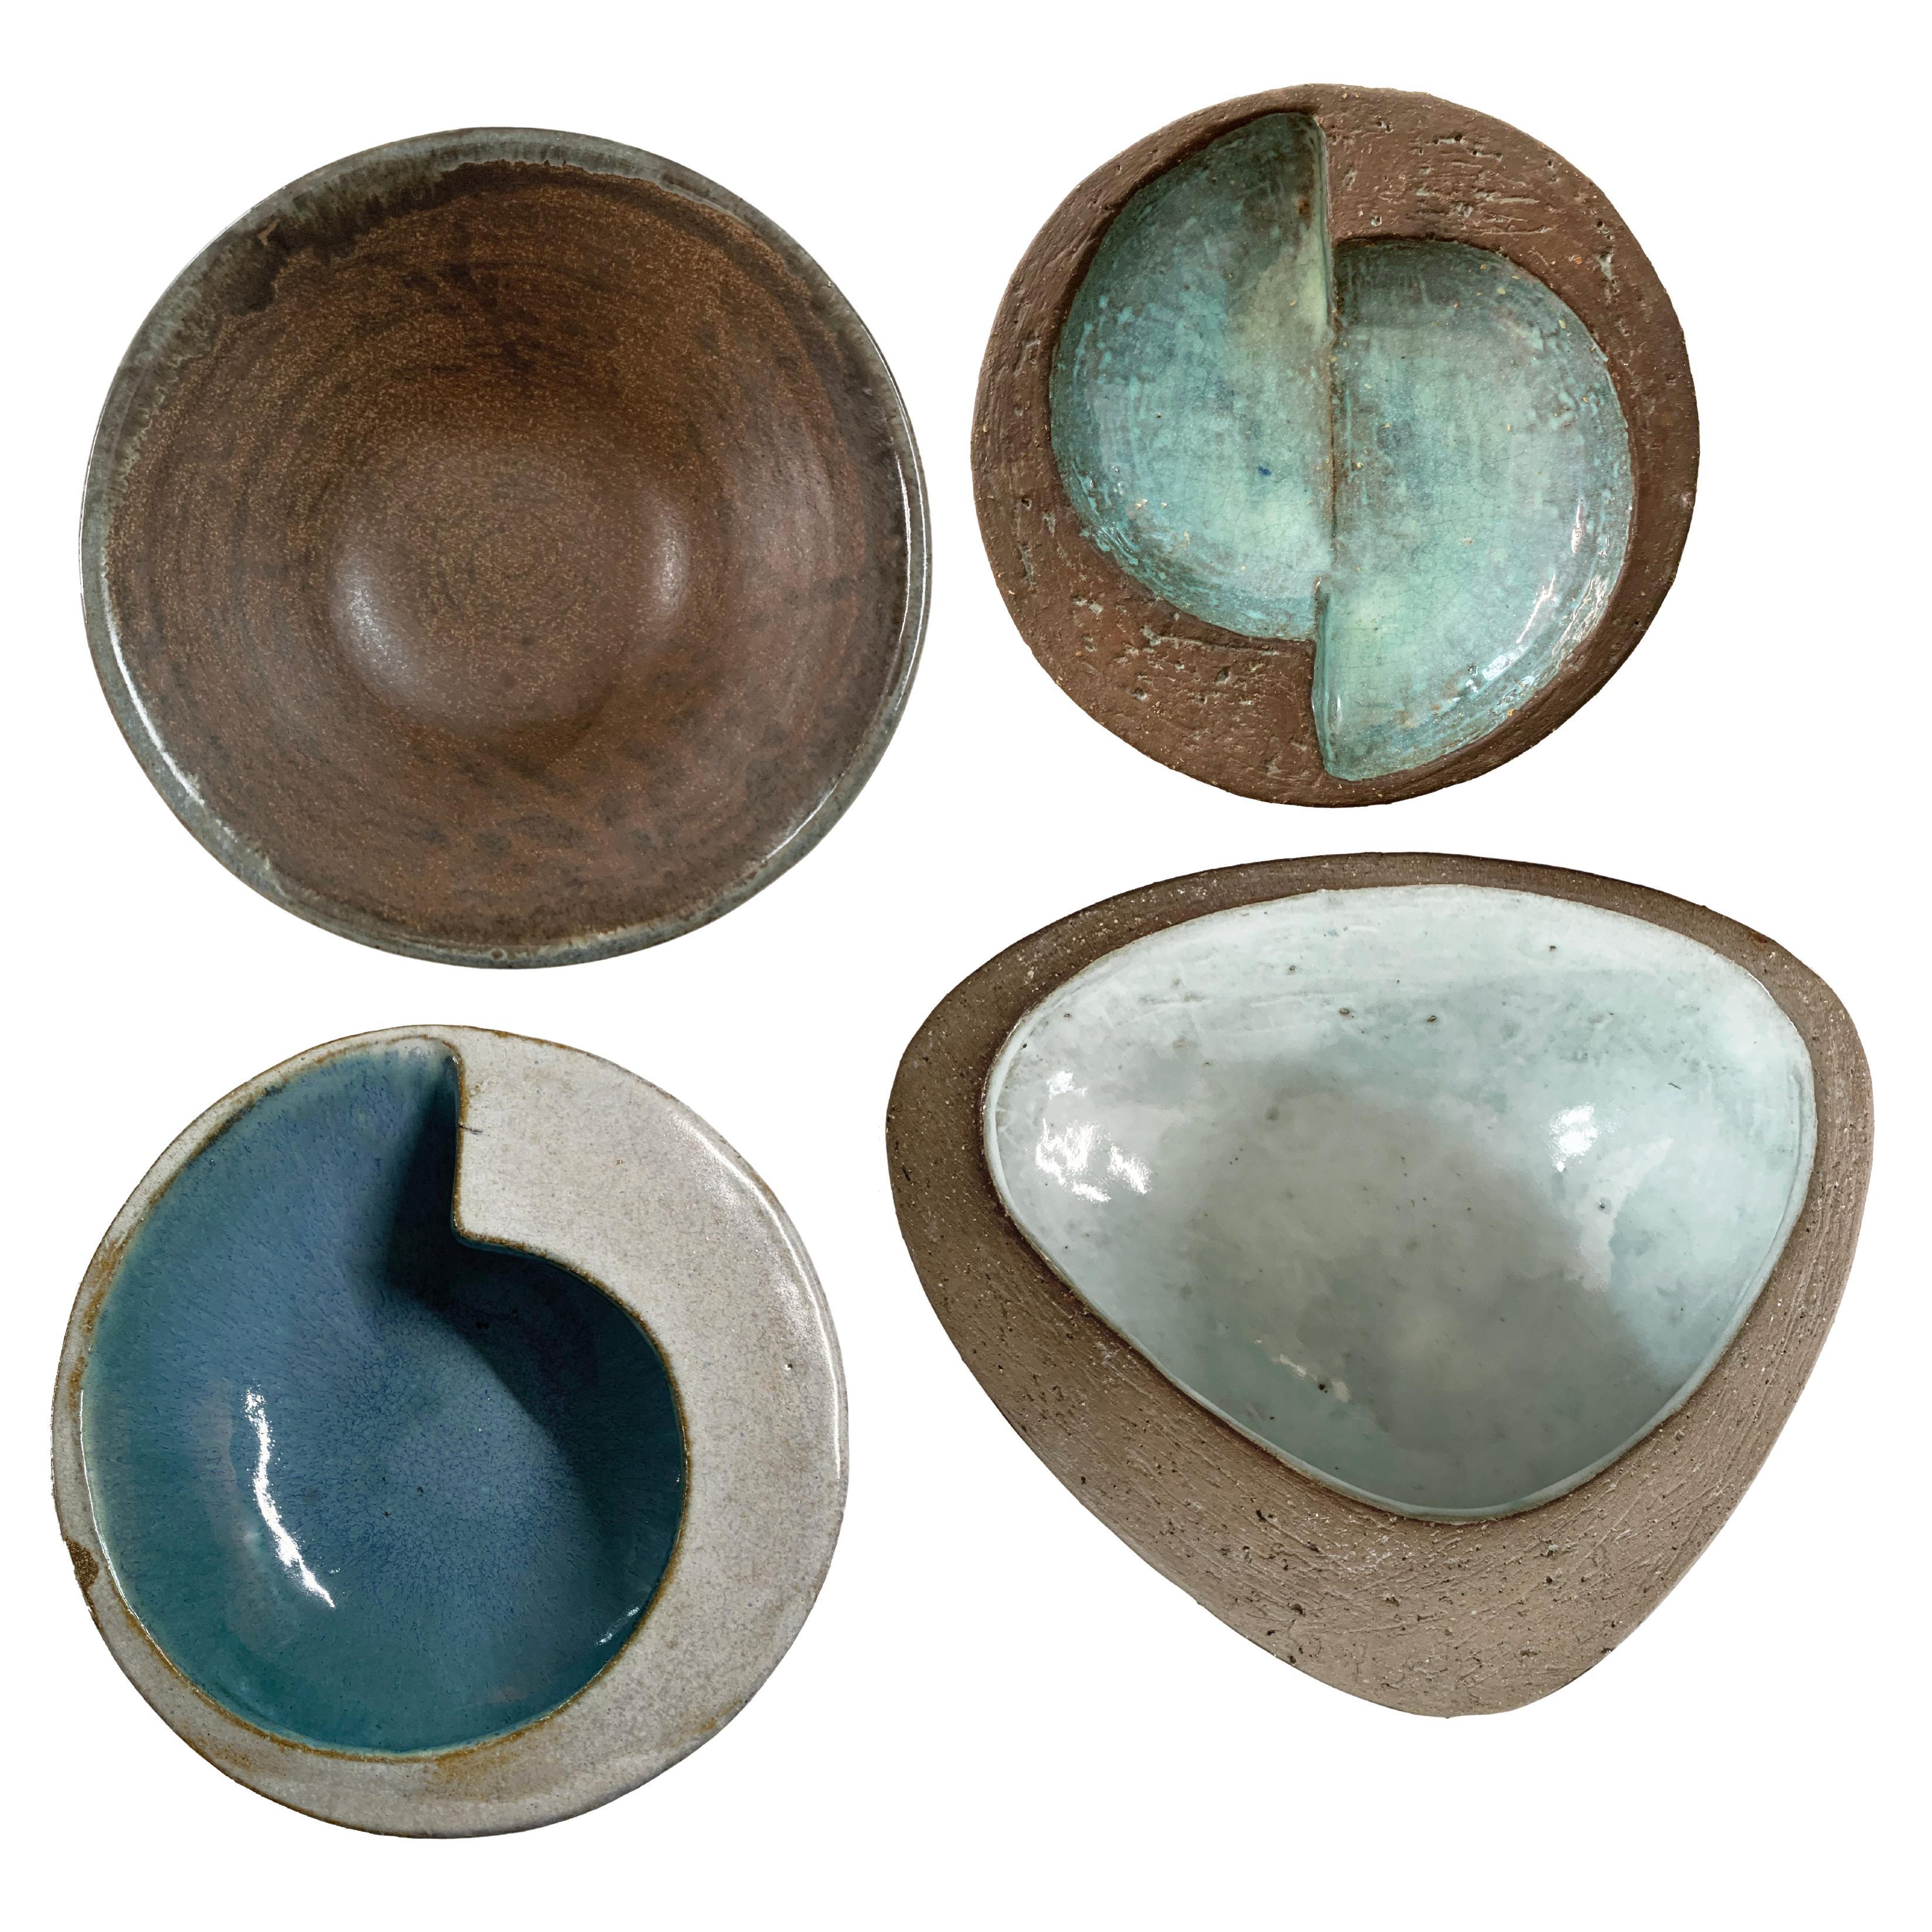 Collection of Iconic Eugene Deutch Ceramic Bowls